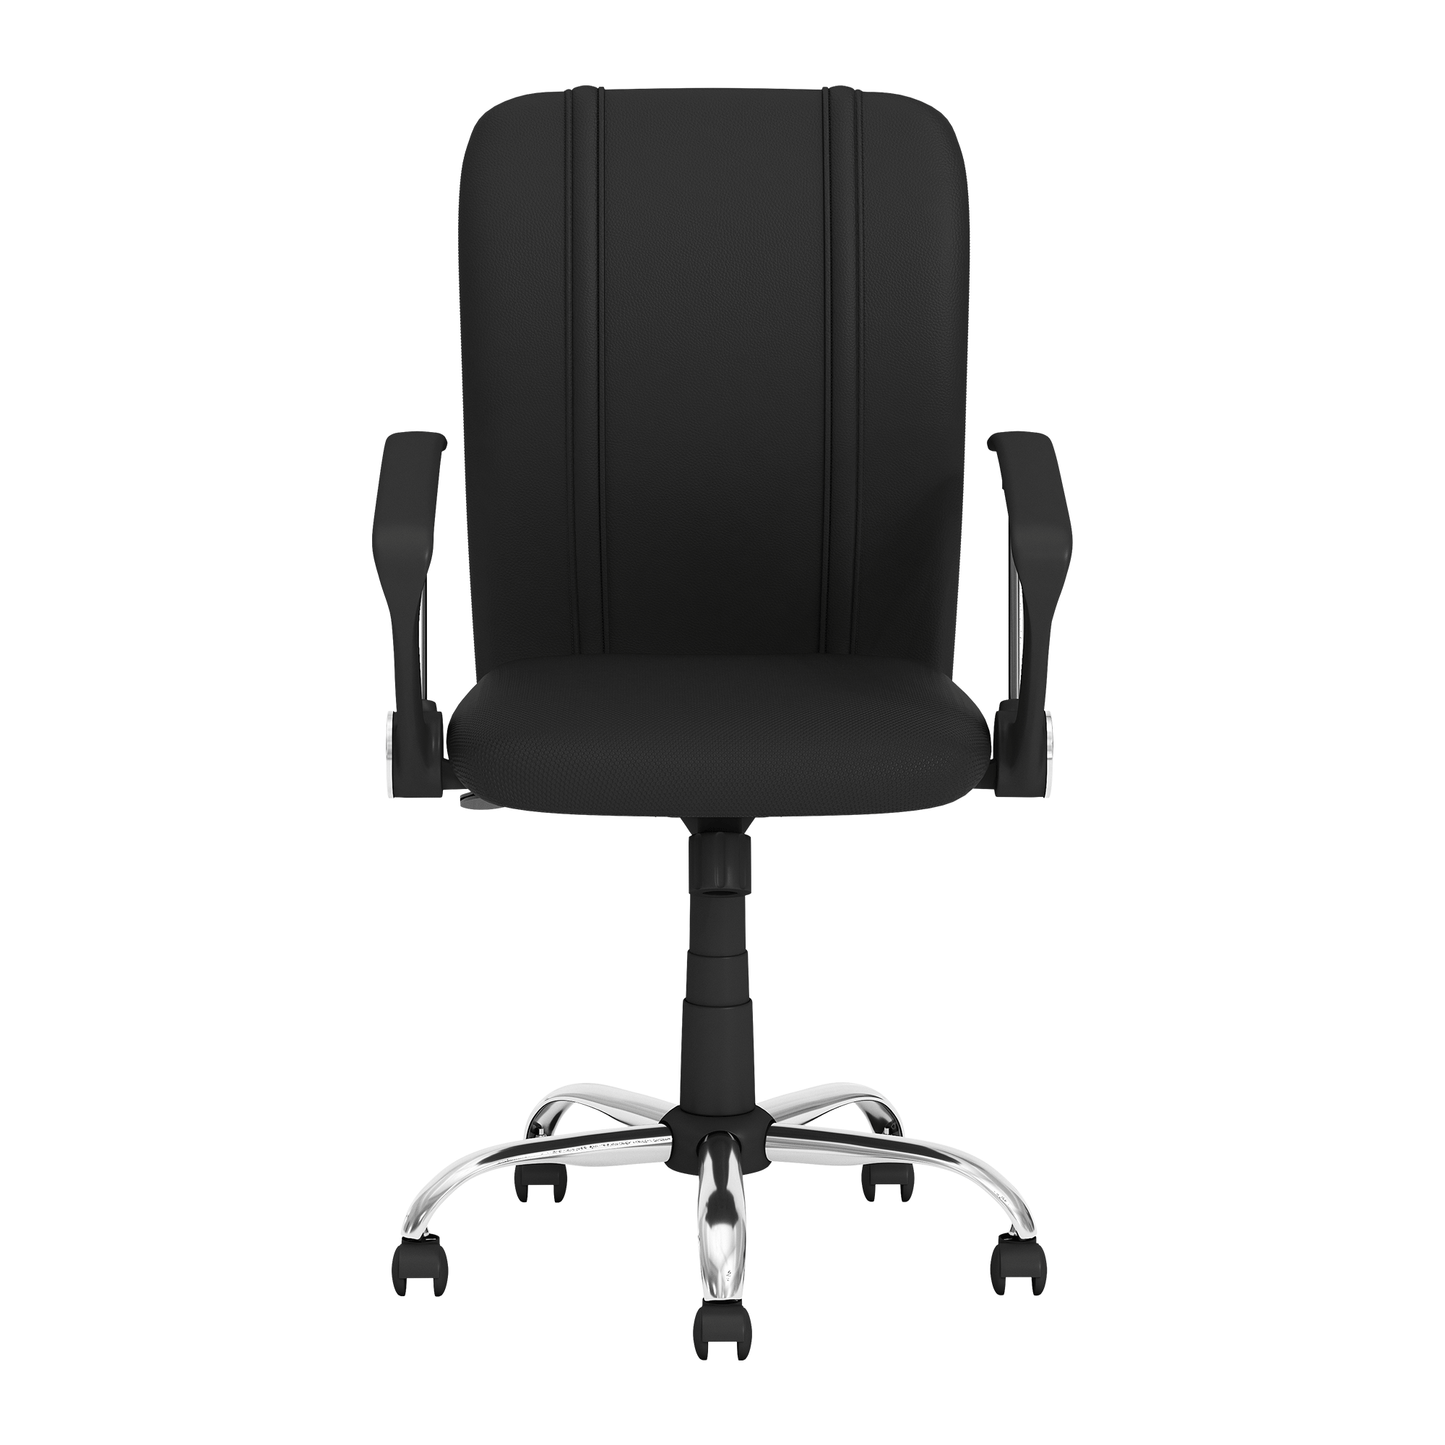 Curve Task Chair with Notre Dame Wordmark Logo